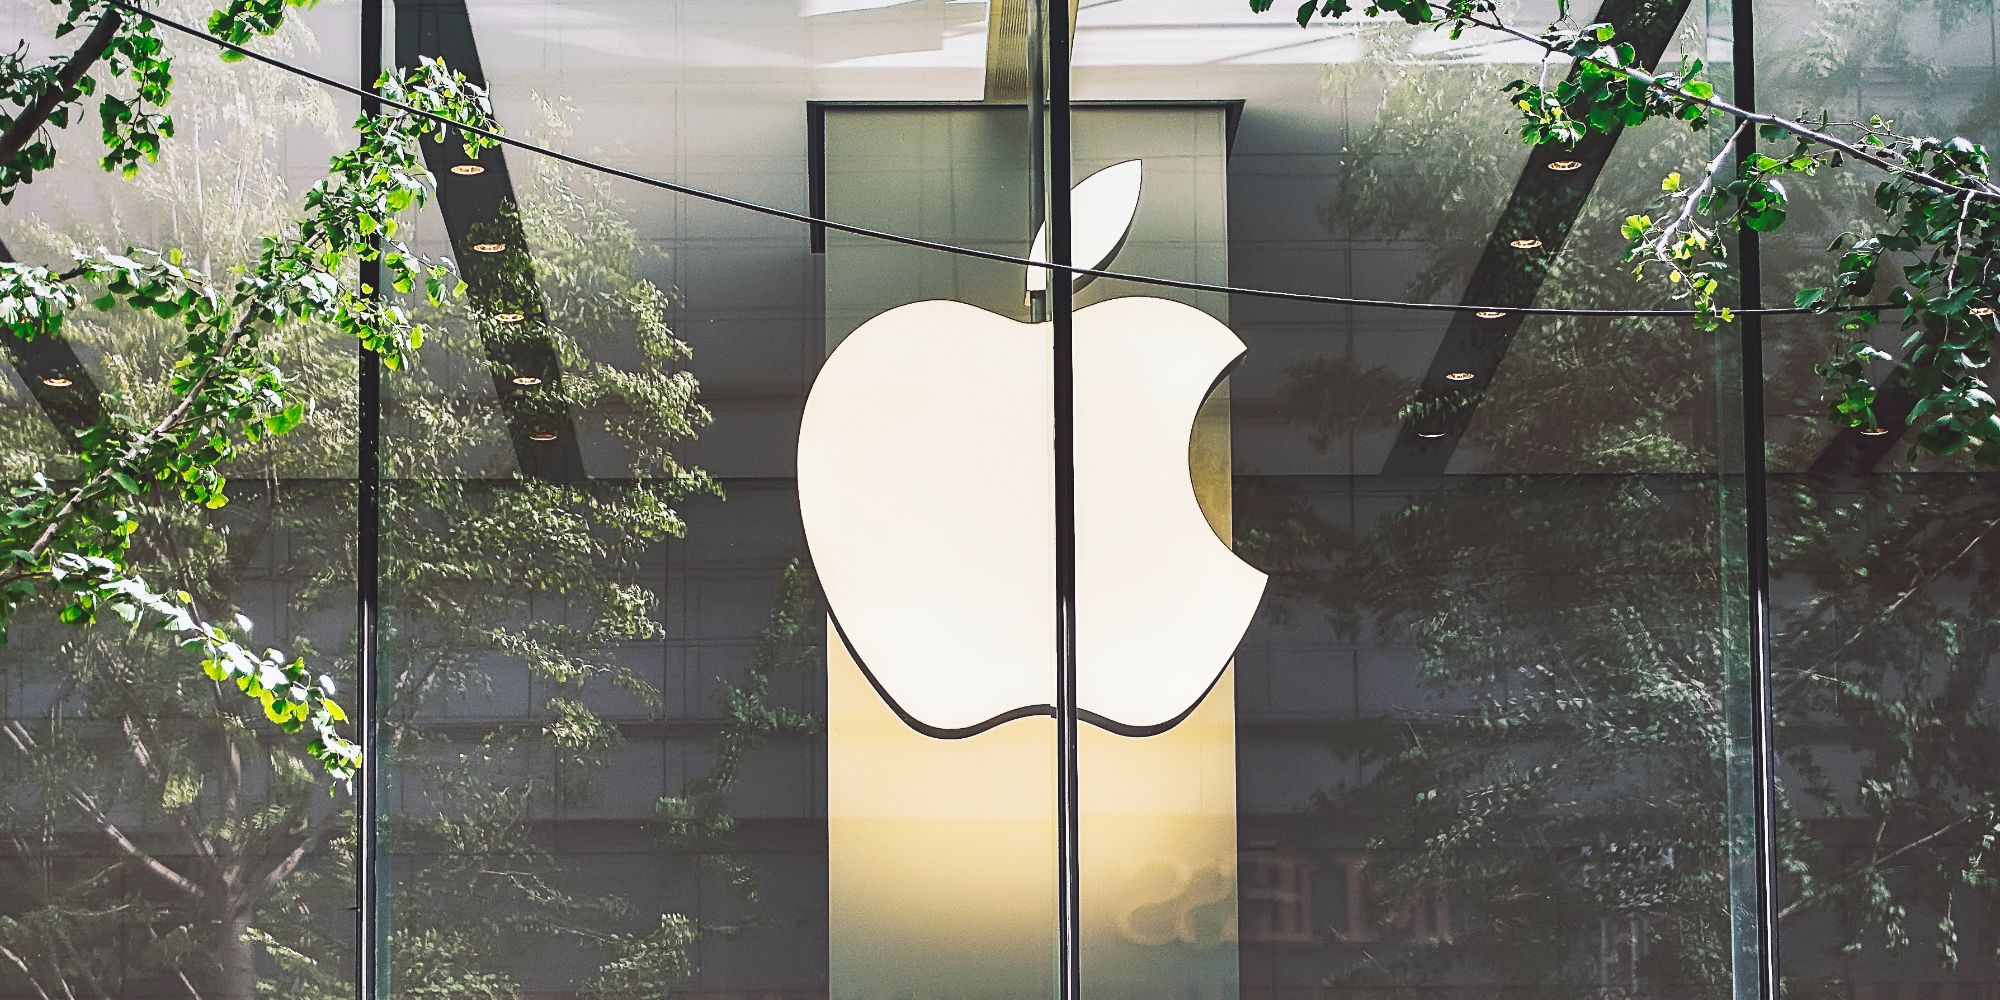 WWDC 2022 Preview: What To Expect From Apple’s June 6 Keynote